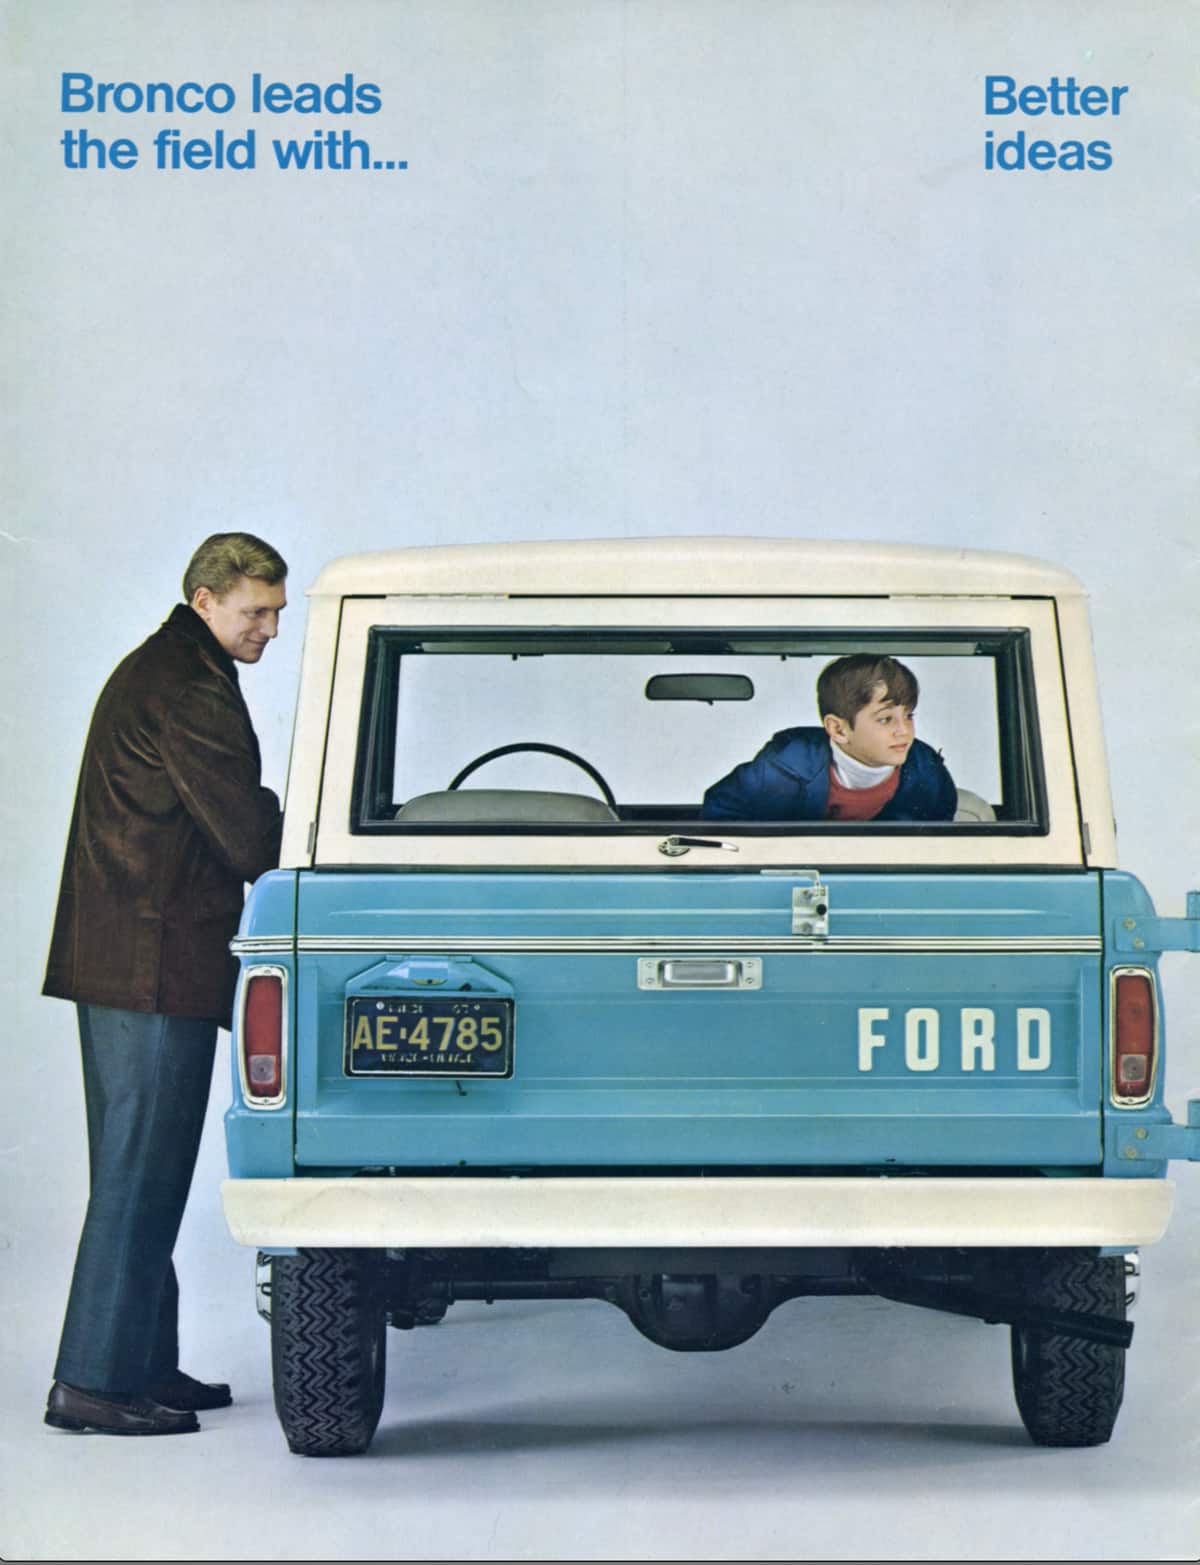 1968 Ford Bronco from The Ford Brochure